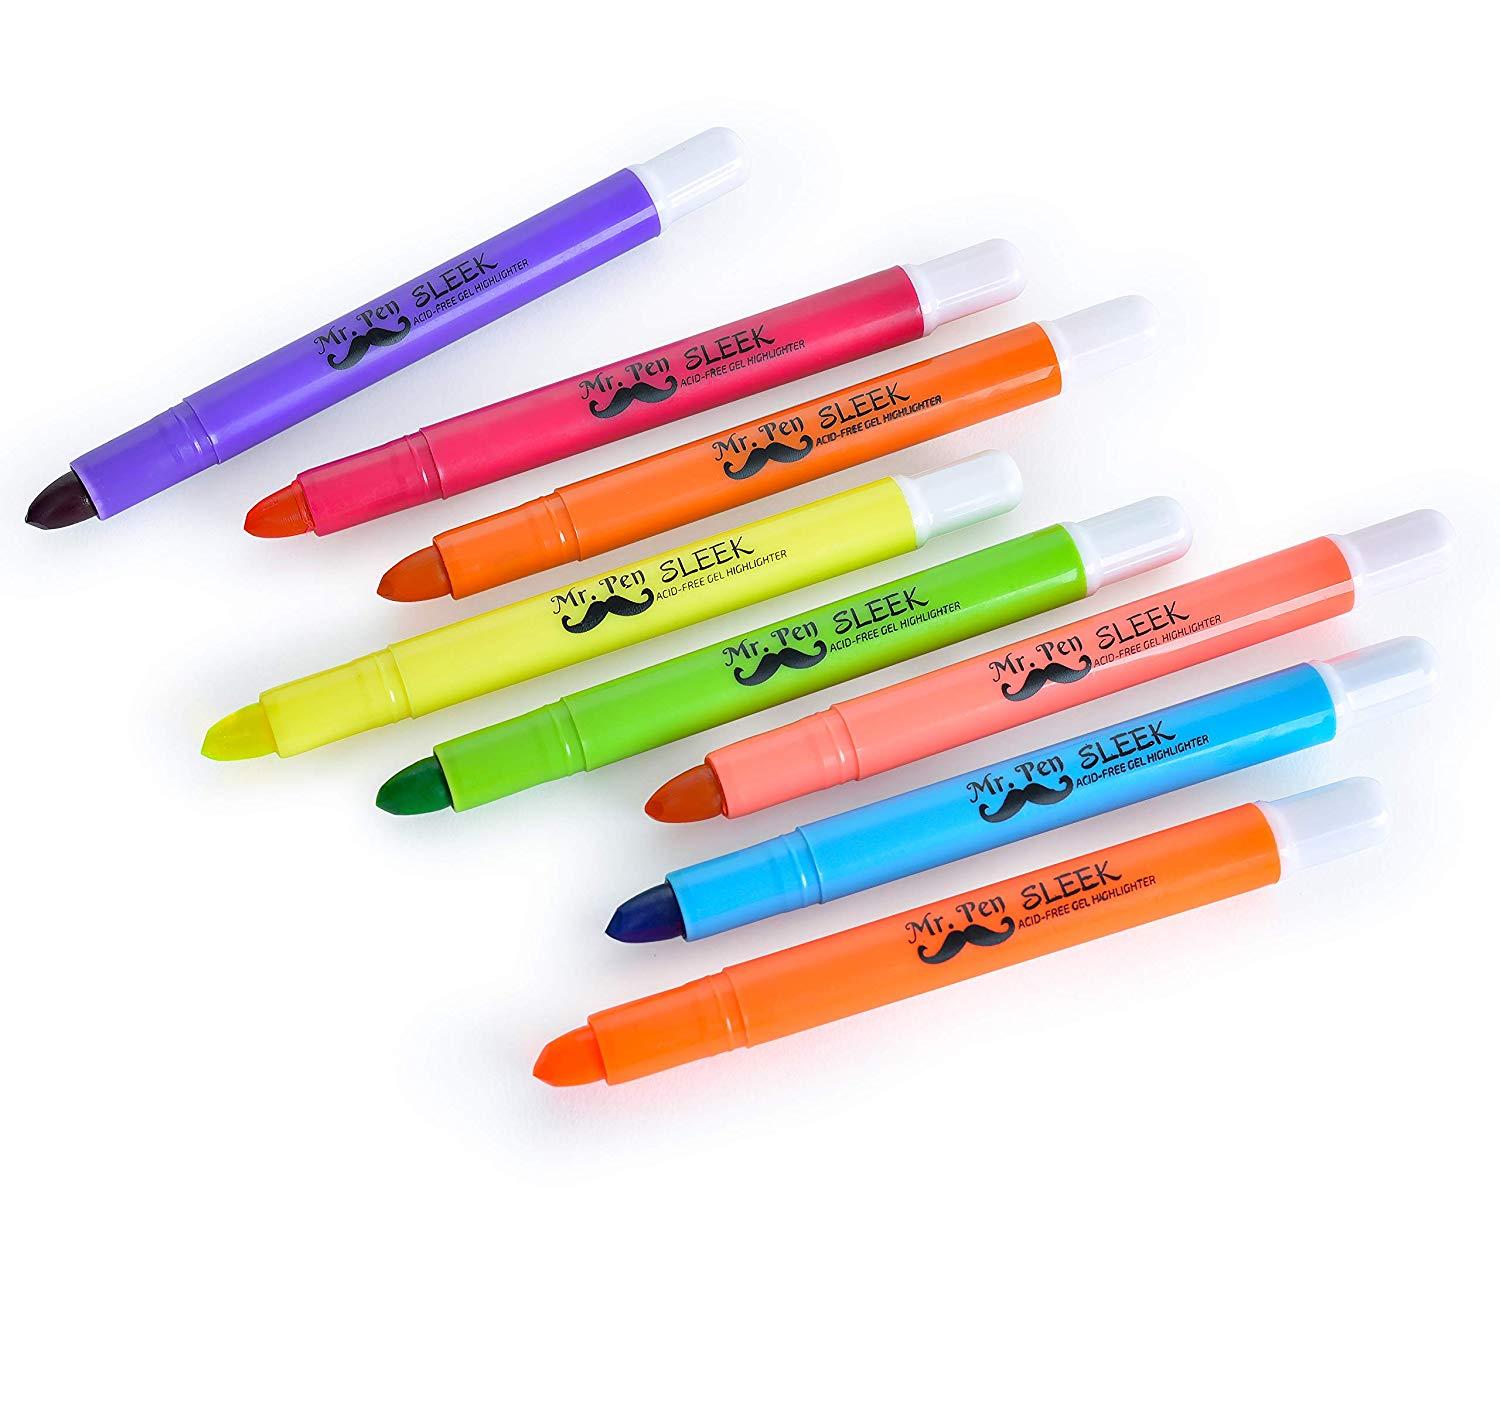 Tebik 10 Colors Bible Safe Dry Gel Highlighters Markers Study Kit Twist-Retractable Design Great for Journaling